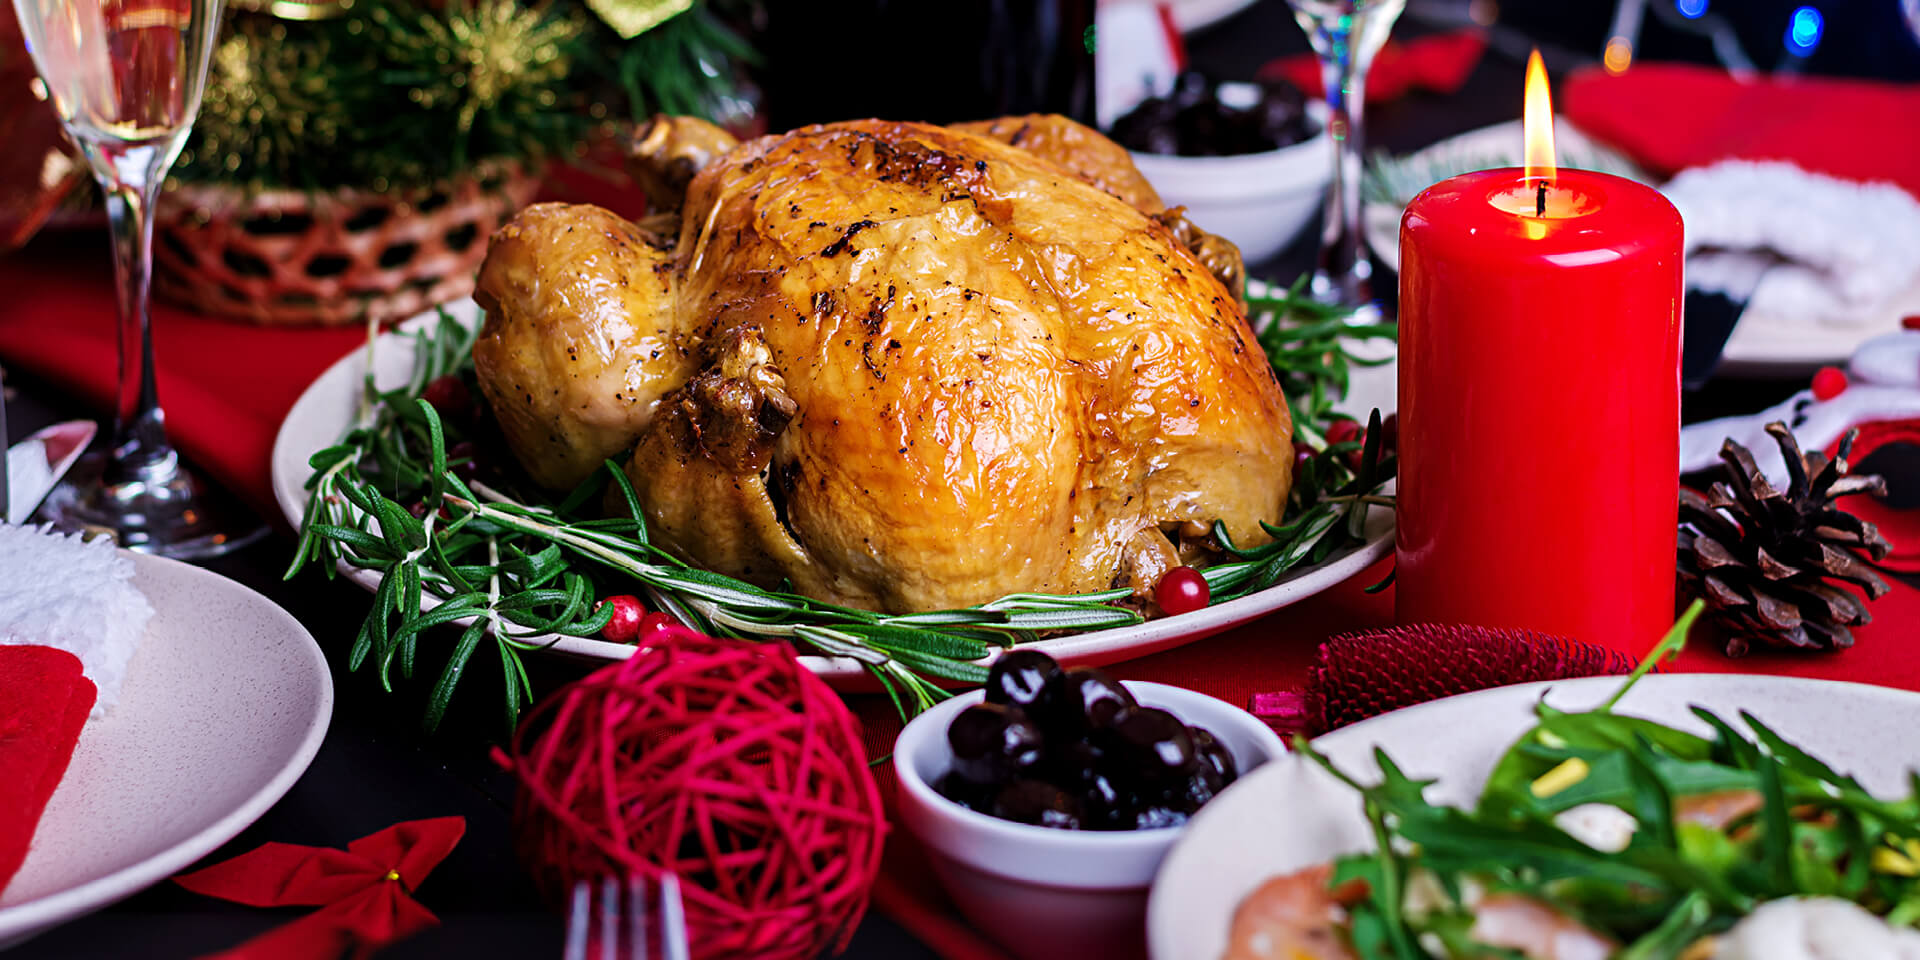 HOW TO MAKE YOUR CHRISTMAS DINNER HEALTHY - The QHotels Collection